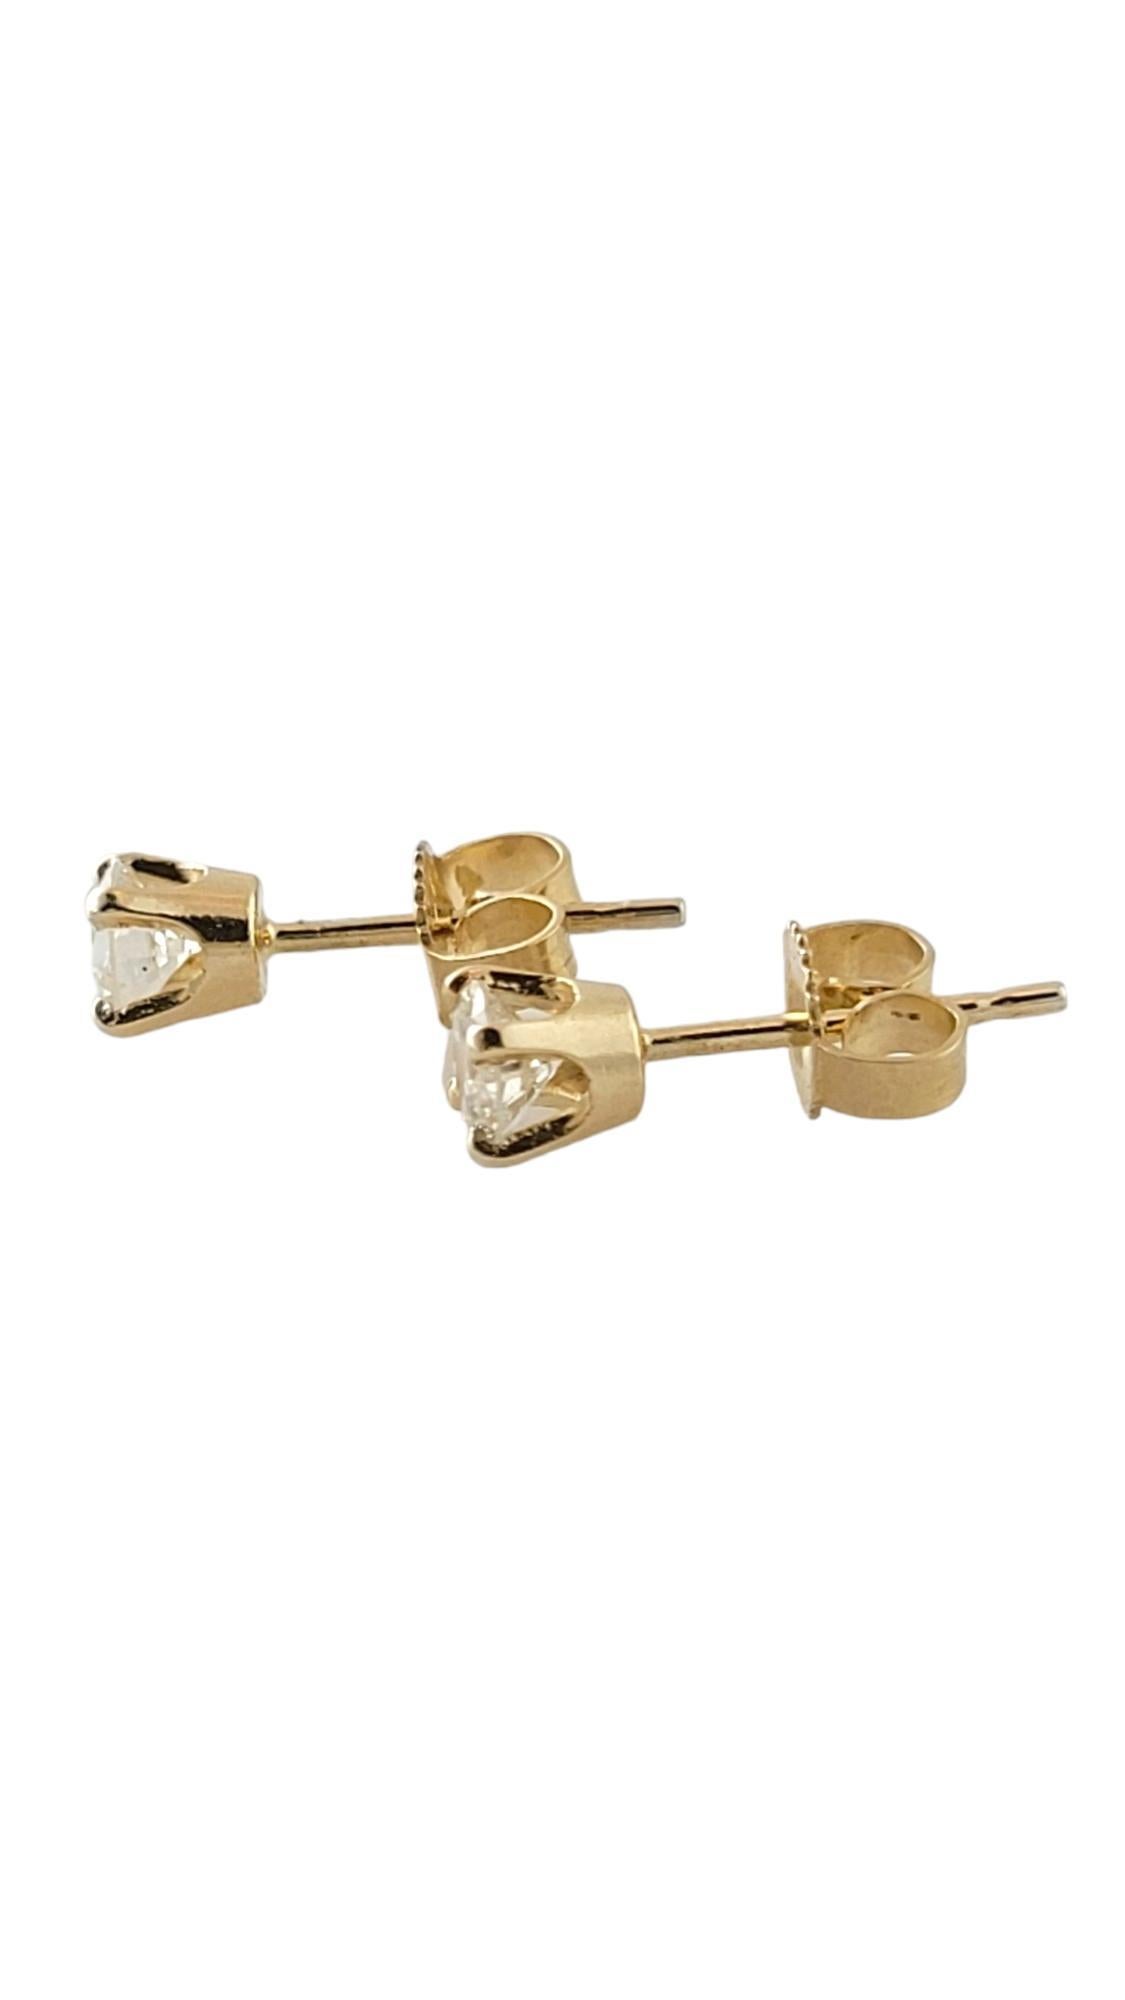 14K Yellow Gold Diamond Stud Earrings

This classic set of diamond stud earrings feature 2 round brilliant cut diamonds set in 14K yellow gold for a gorgeous look!

Approximate total diamond weight: .40 cts

Diamond color: G

Diamond clarity: